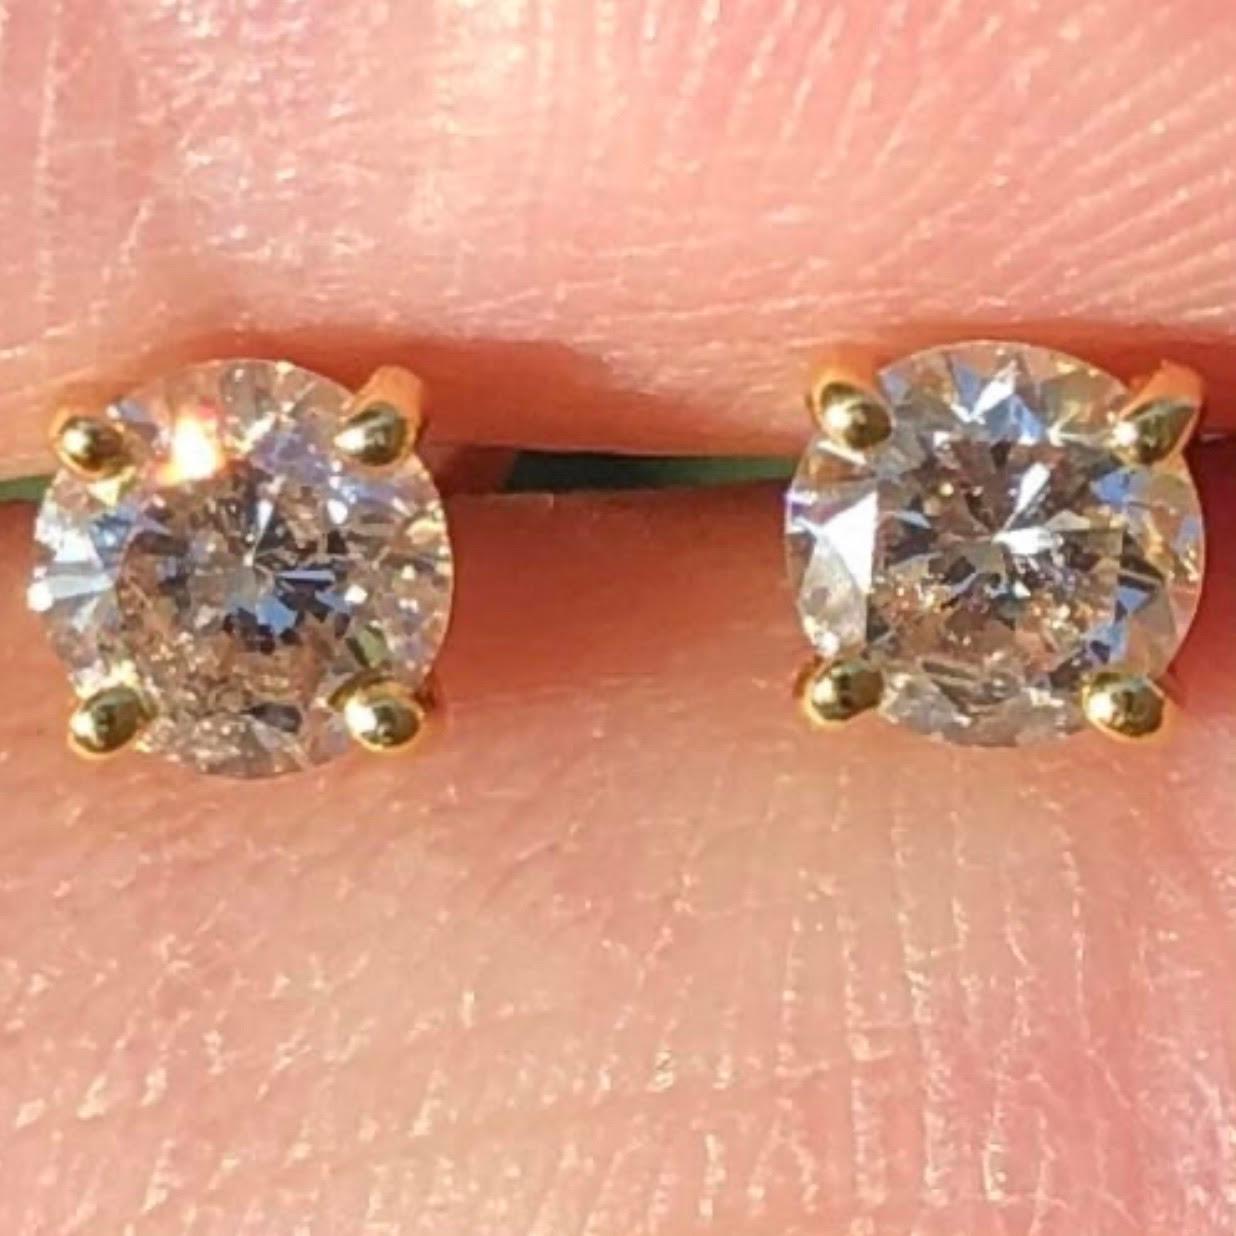 Classic over 1/2 Carat solitaire diamond stud earrings in 14k yellow gold. Pair of natural earth-mined round brilliant diamonds weighing approx. 0.62 carats are prong-set in these 14K basket studs.

Diamond stud earrings come with a fine velvet